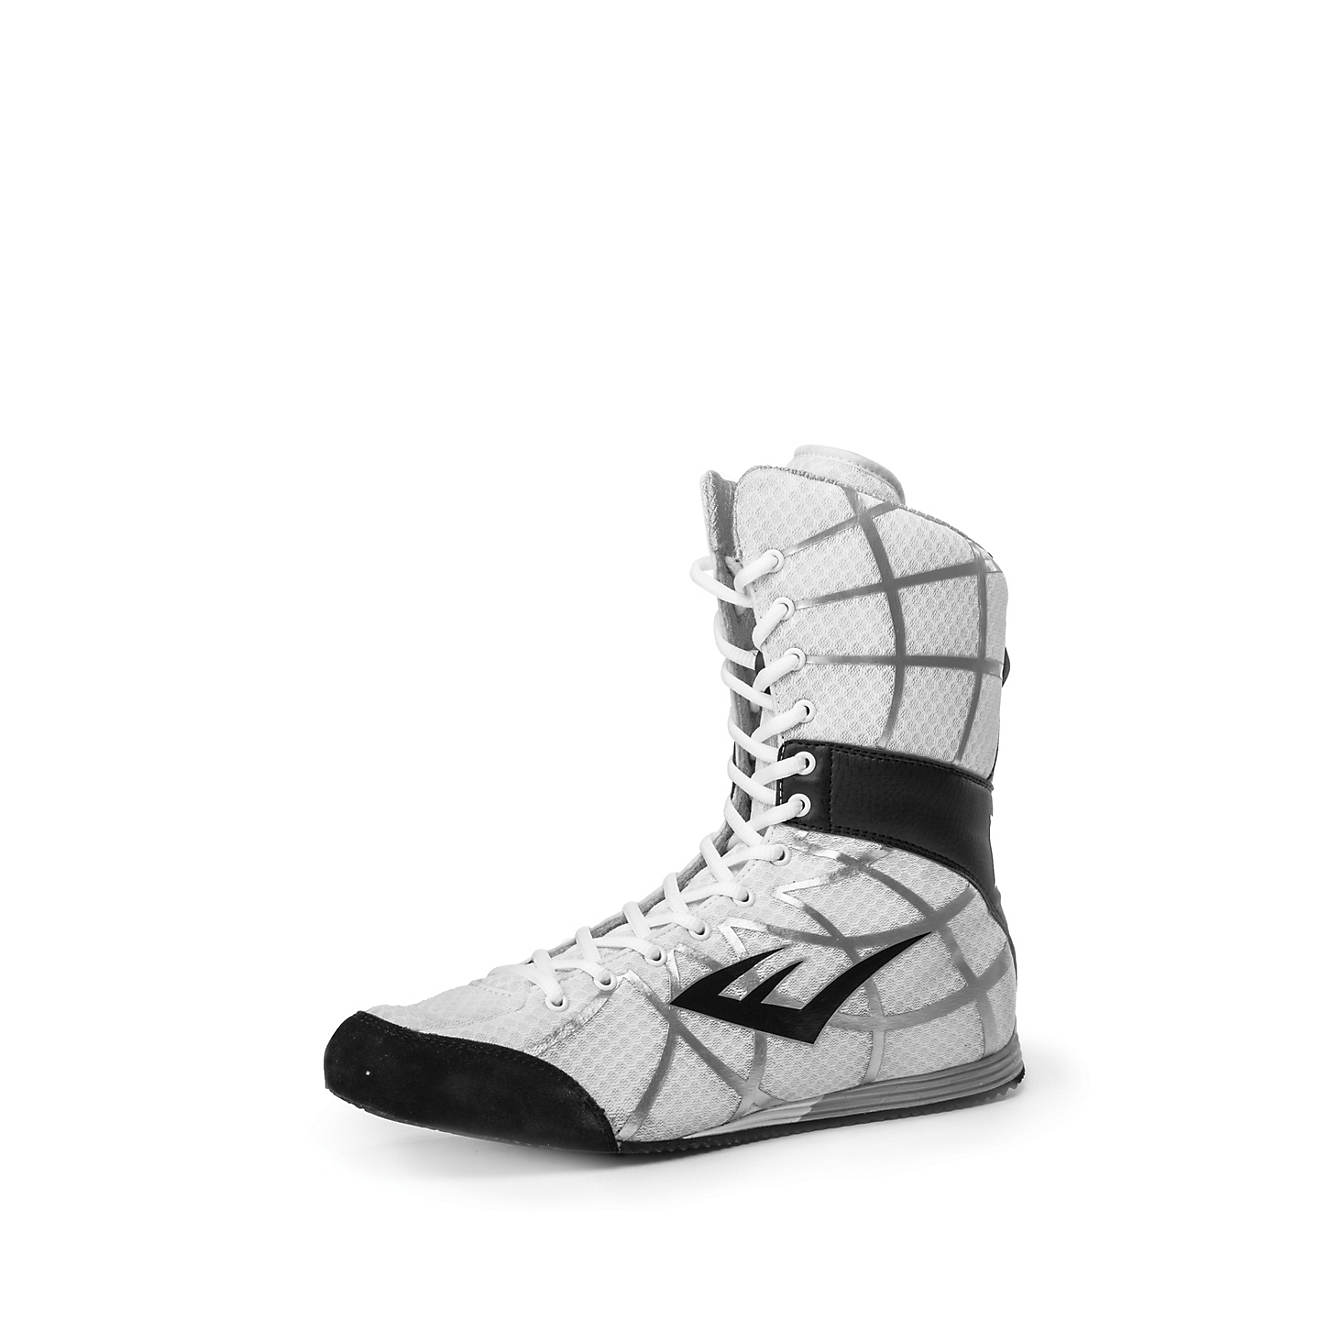 Everlast Men's Grid High-Top Boxing Shoes                                                                                        - view number 1